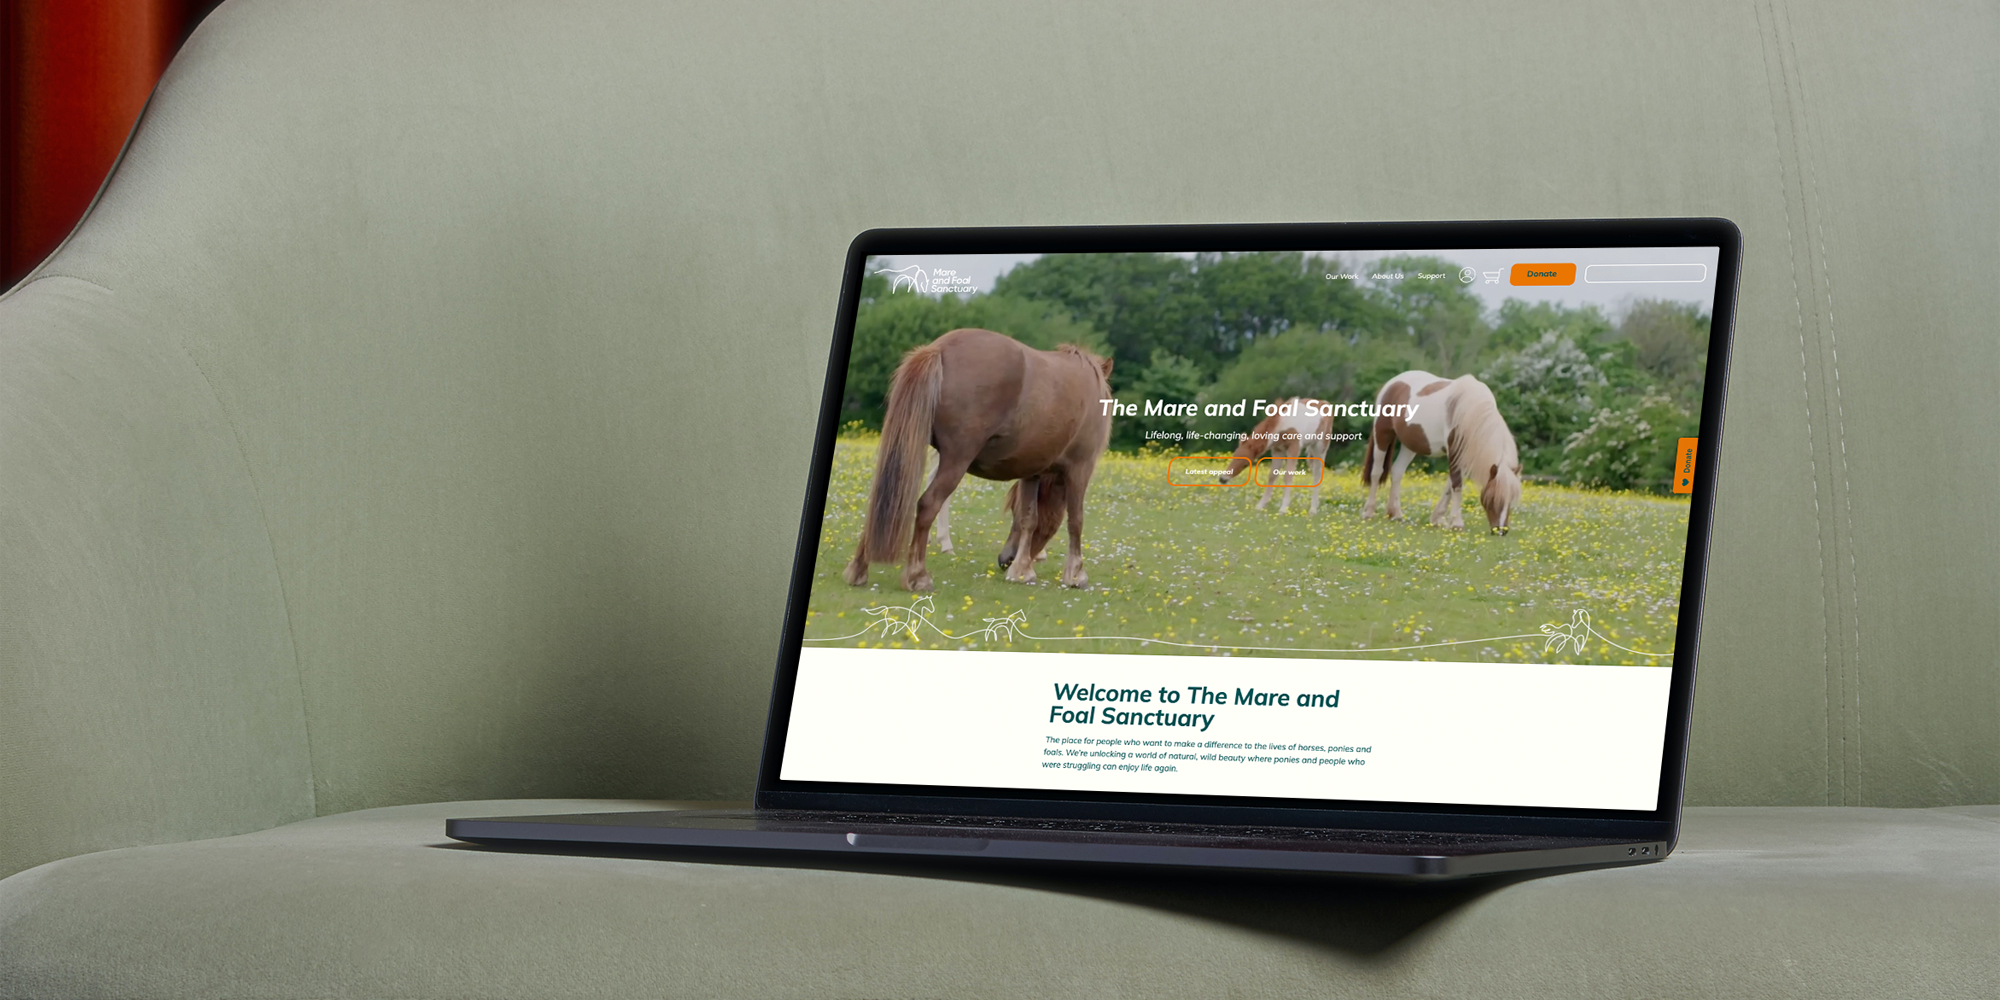 Mare and Foal sanctuary page shown on a laptop